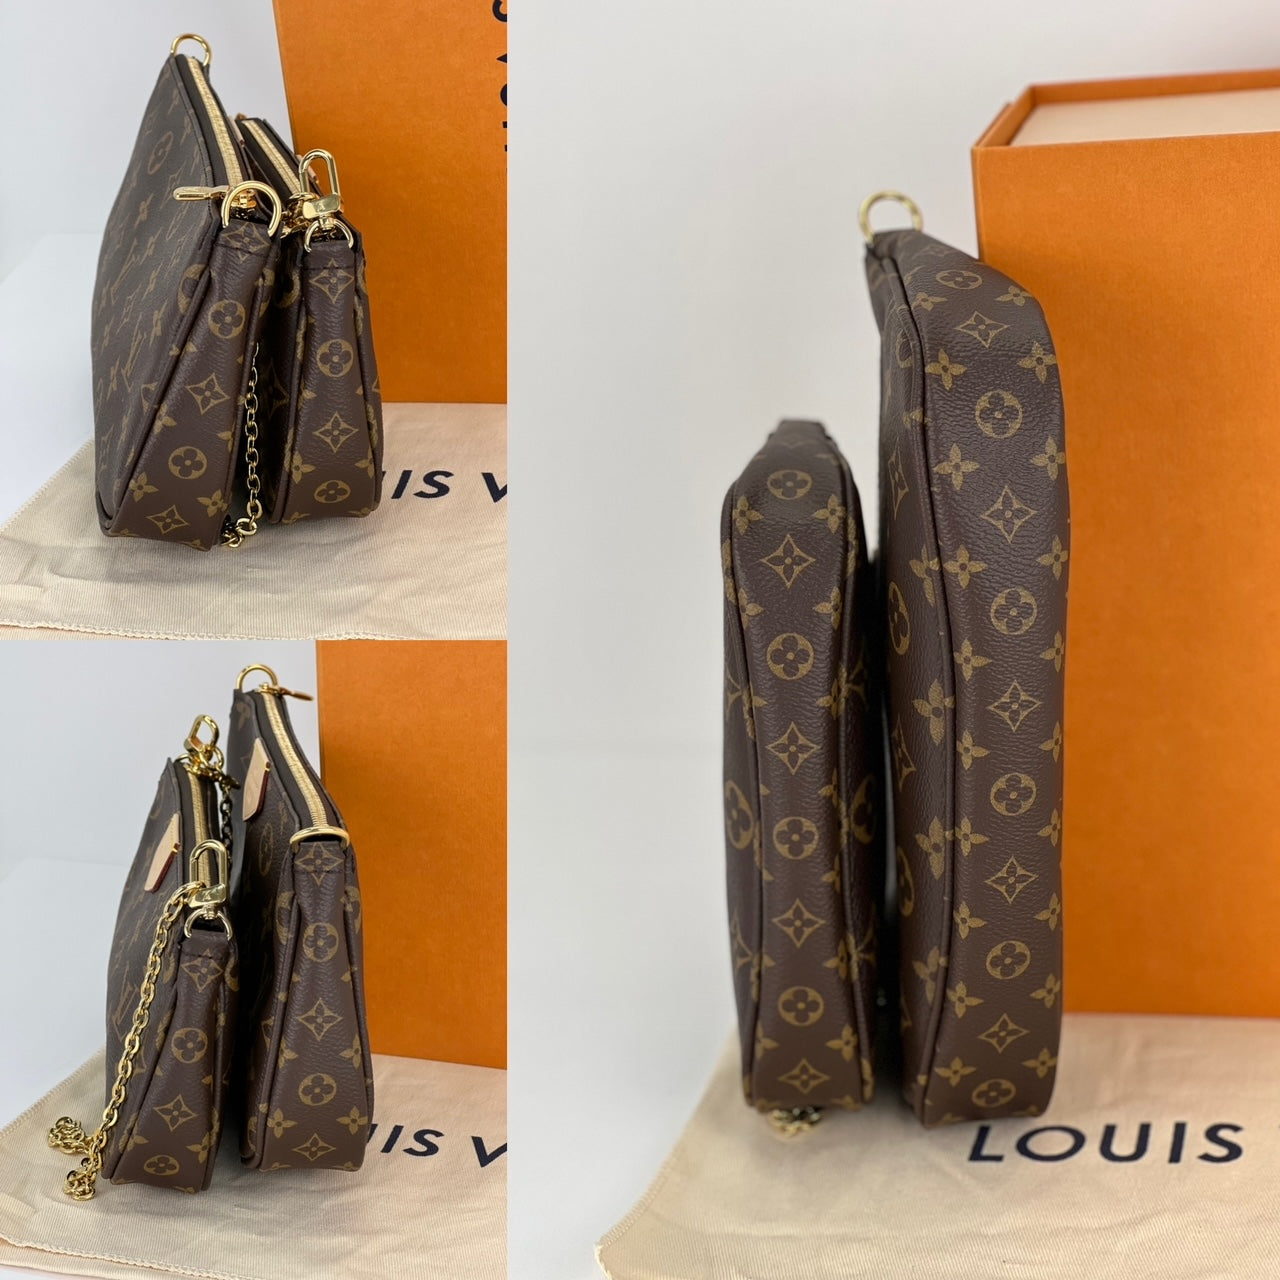 Louis Vuitton Orsay Canvas Clutch Bag (pre-owned) in Brown